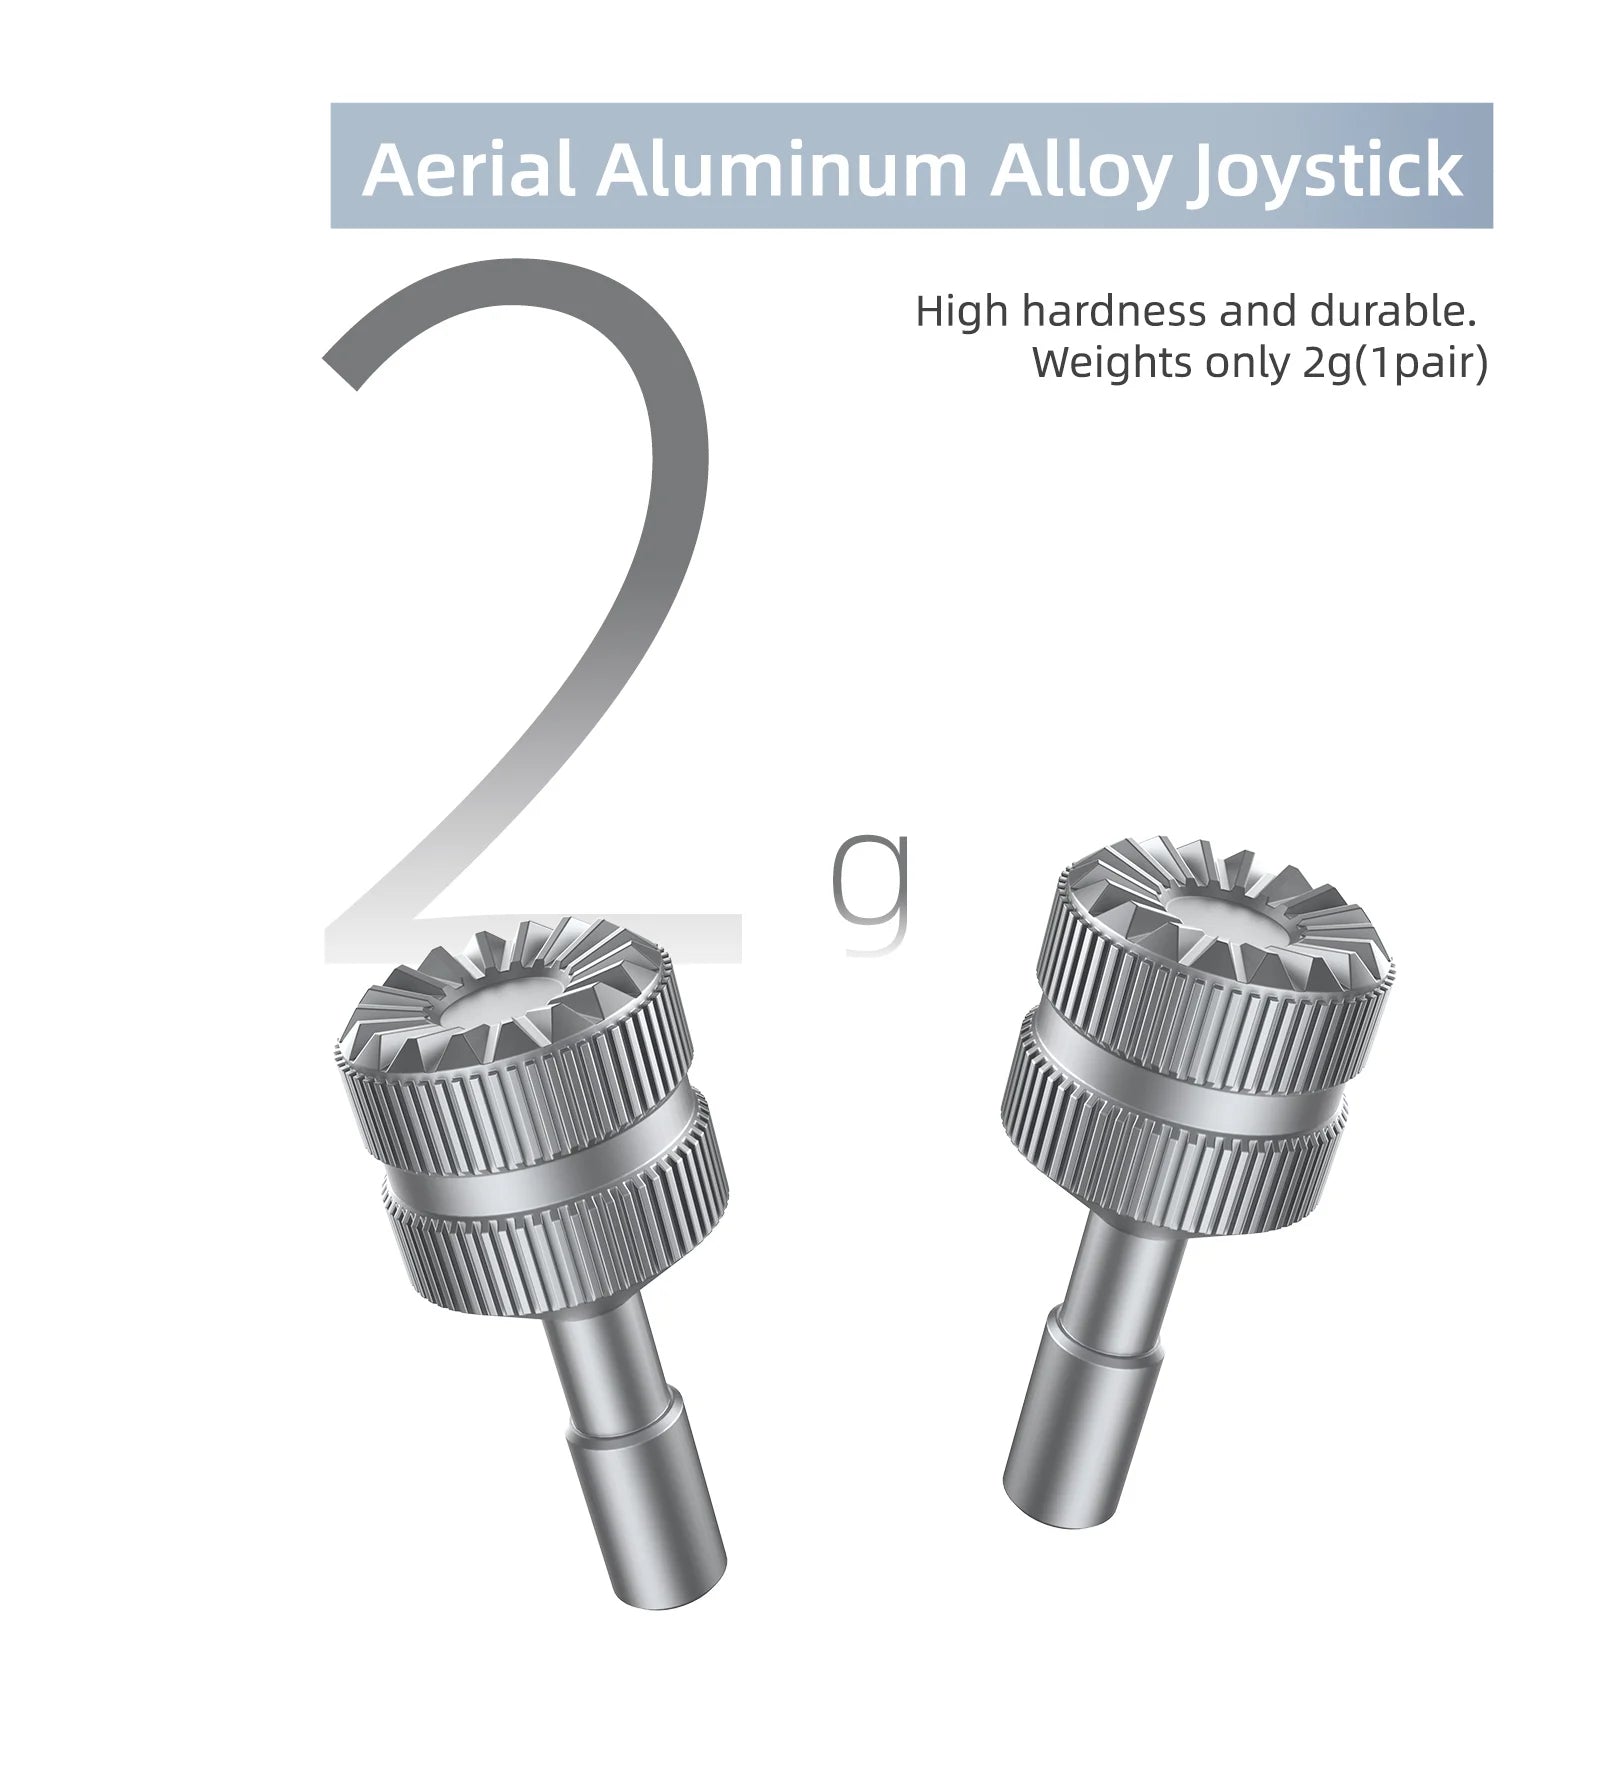 Aerial Aluminum Alloy Joystick High hardness and durable: Weights only 2